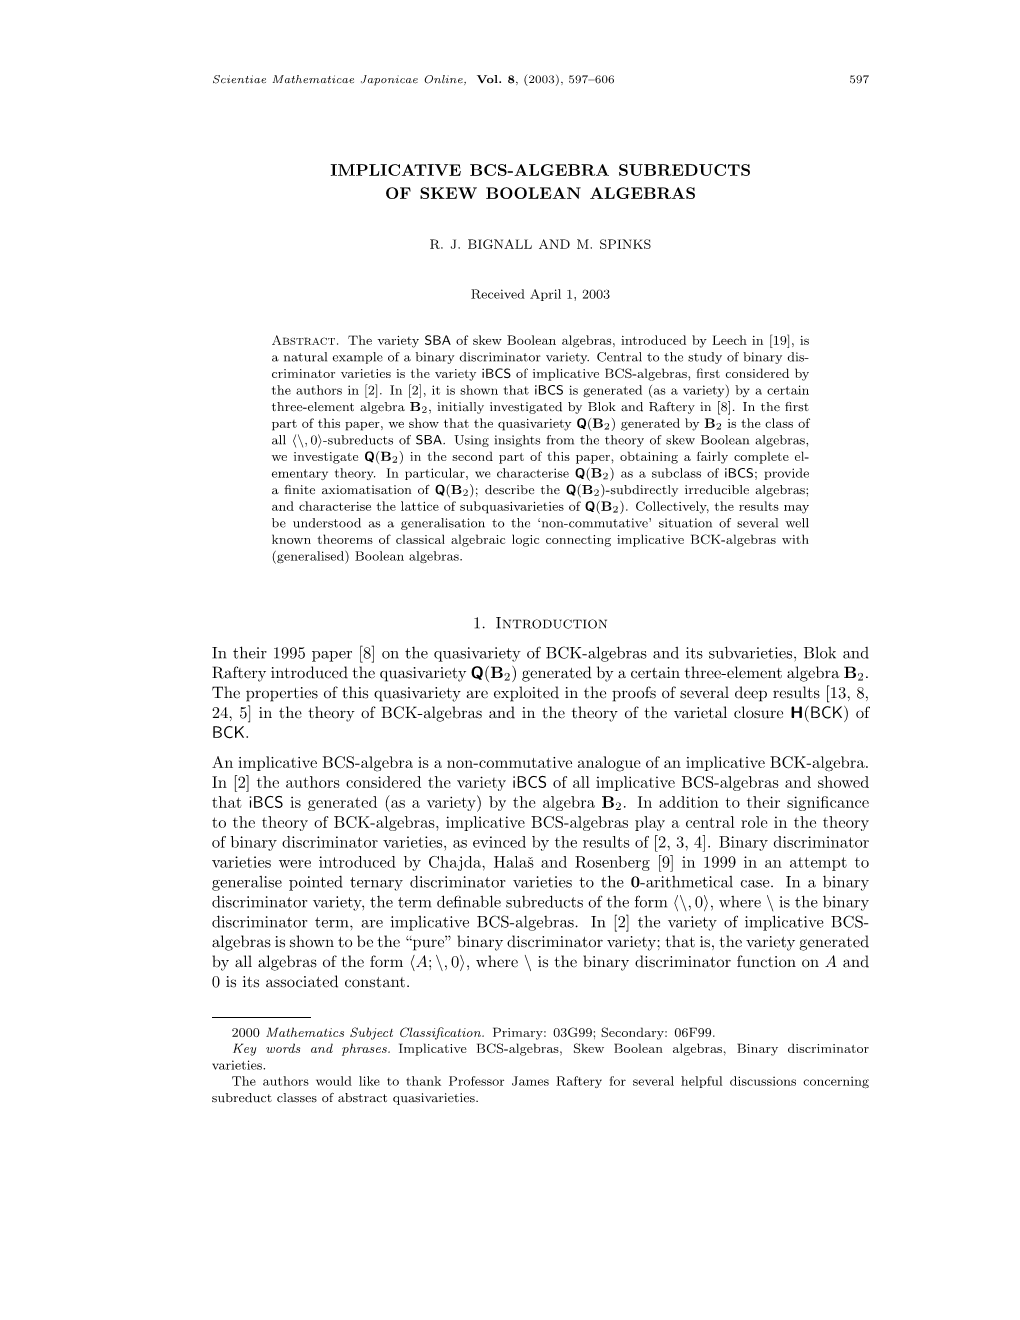 IMPLICATIVE BCS-ALGEBRA SUBREDUCTS of SKEW BOOLEAN ALGEBRAS 1. Introduction in Their 1995 Paper [8] on the Quasivariety of BCK-A